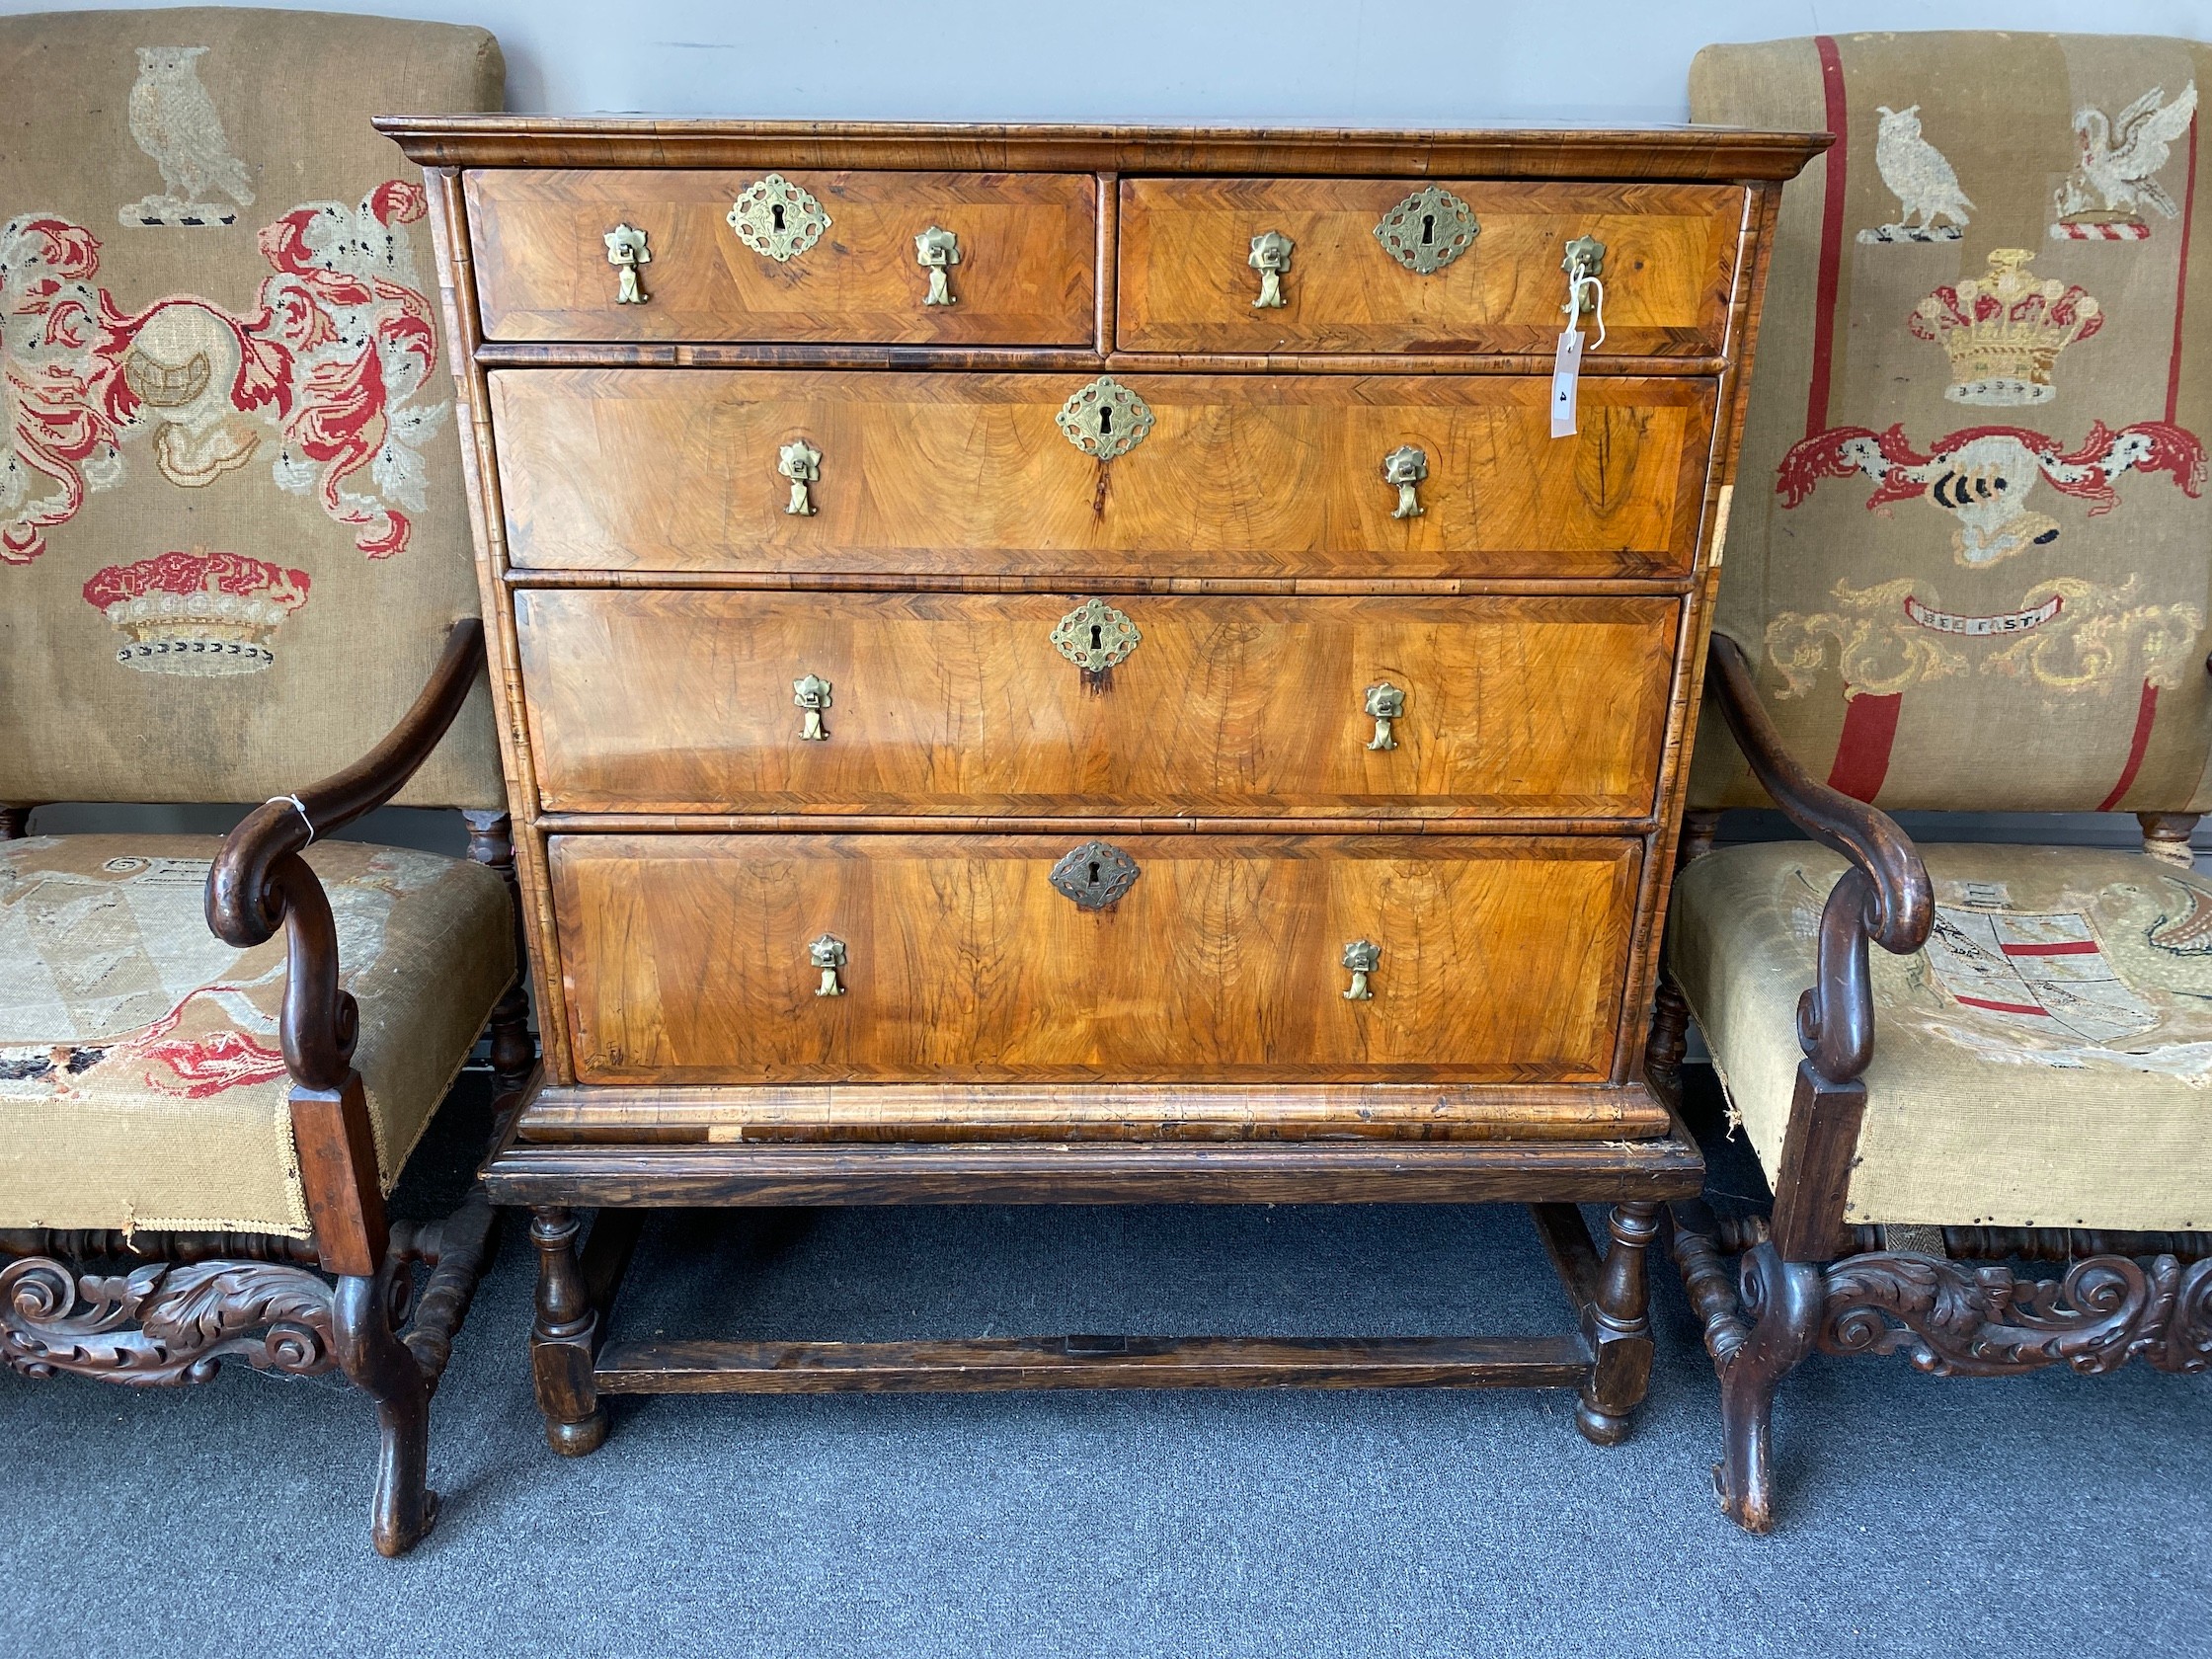 An 18th century feather banded walnut chest on stand, width 96cm, depth 58cm, height 109cm